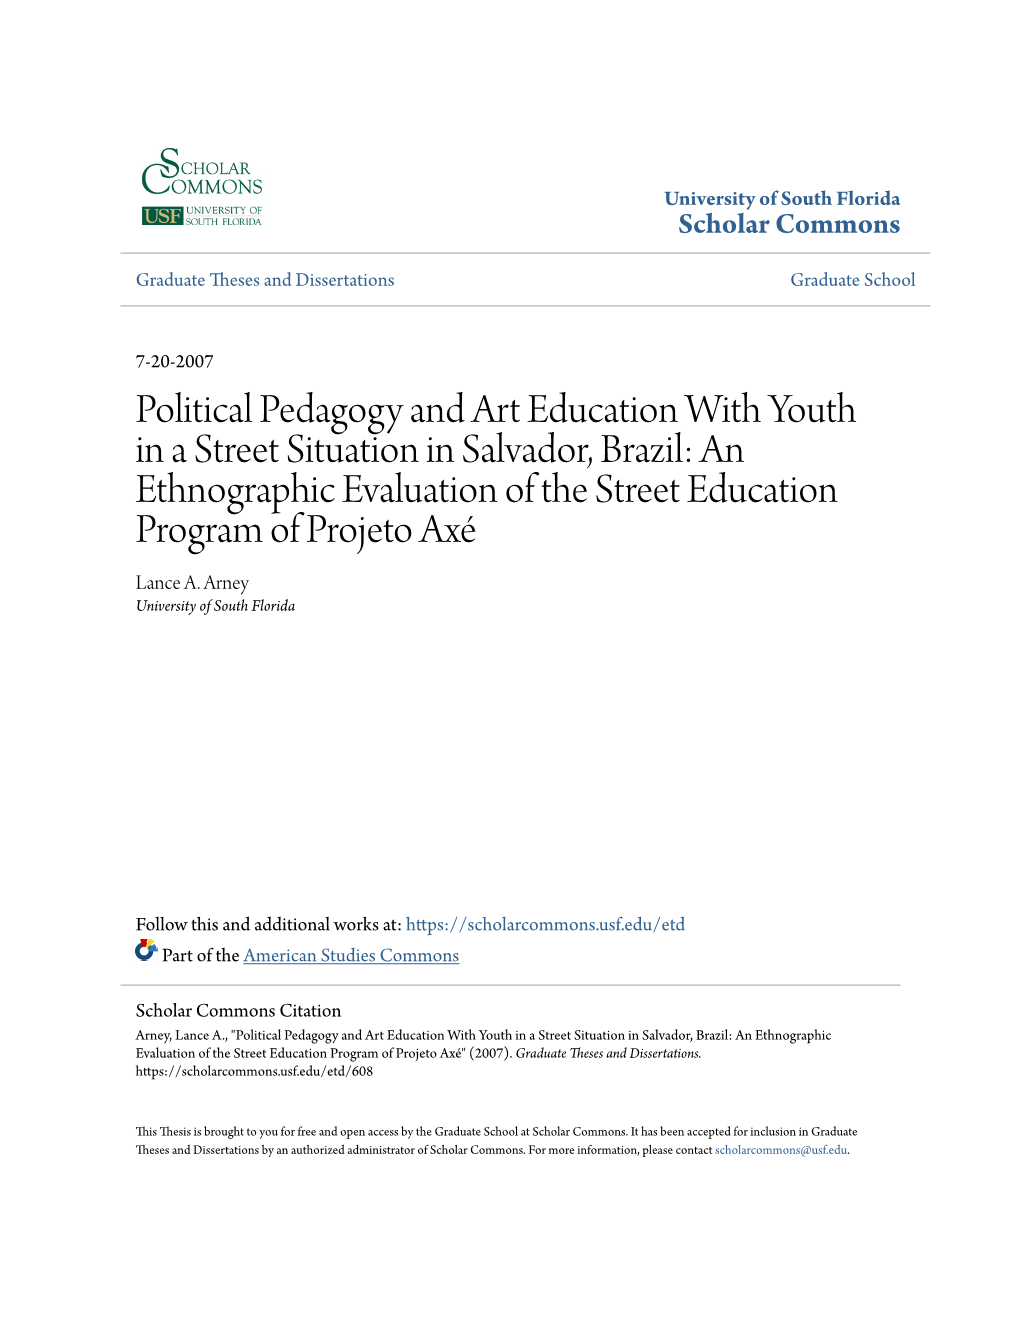 Political Pedagogy and Art Education with Youth in a Street Situation In